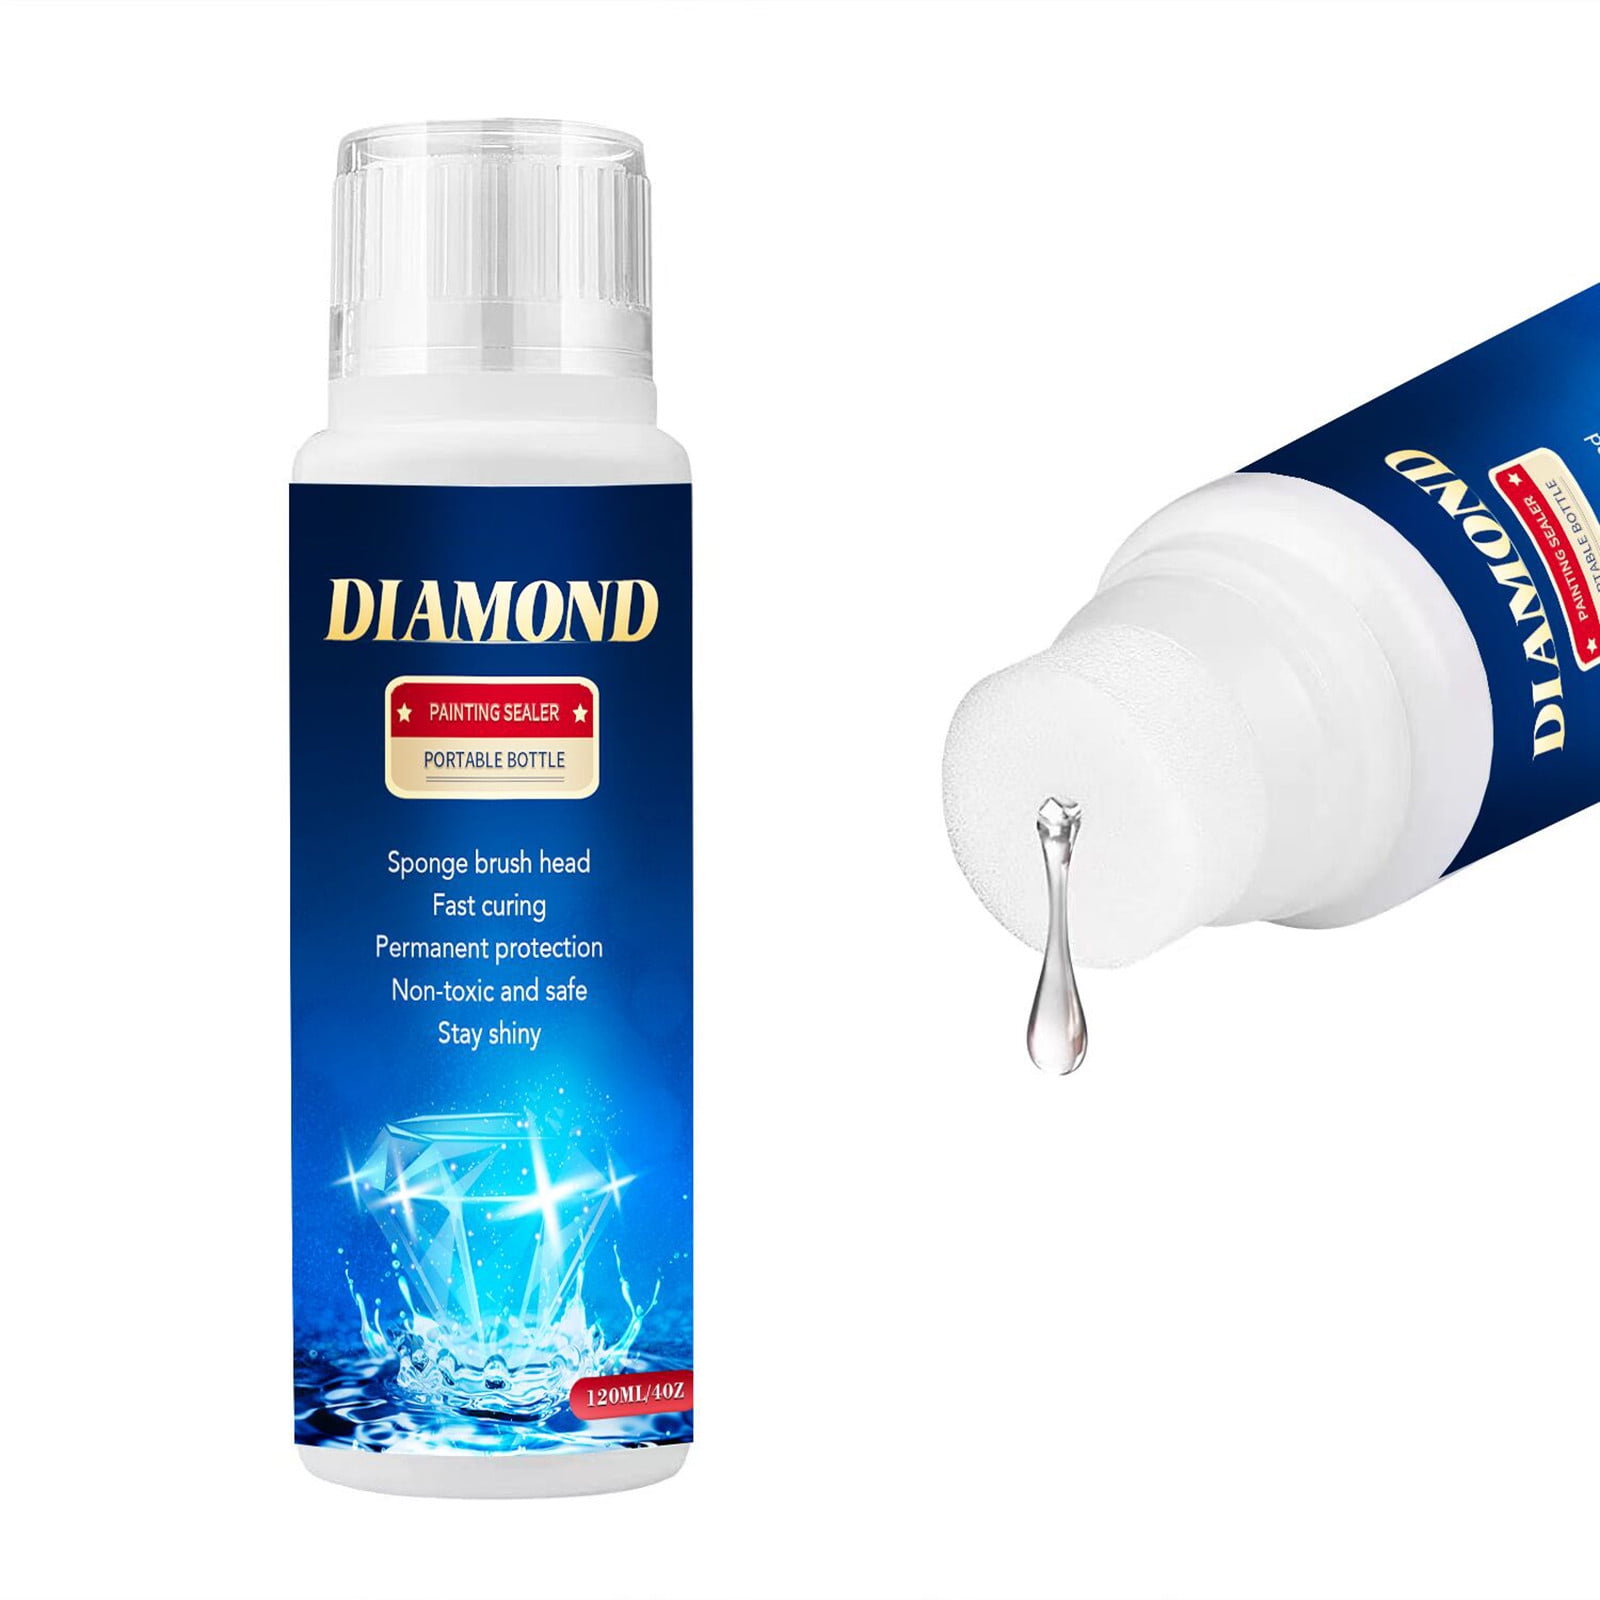 SHENGXINY Cleaning Supplies Clearance! Diamond Art Painting Sealer 1 Pack  120Ml 5D Diamond Art Painting Art Glue With Sponge Head Fast Drying Prevent  Falling Off 